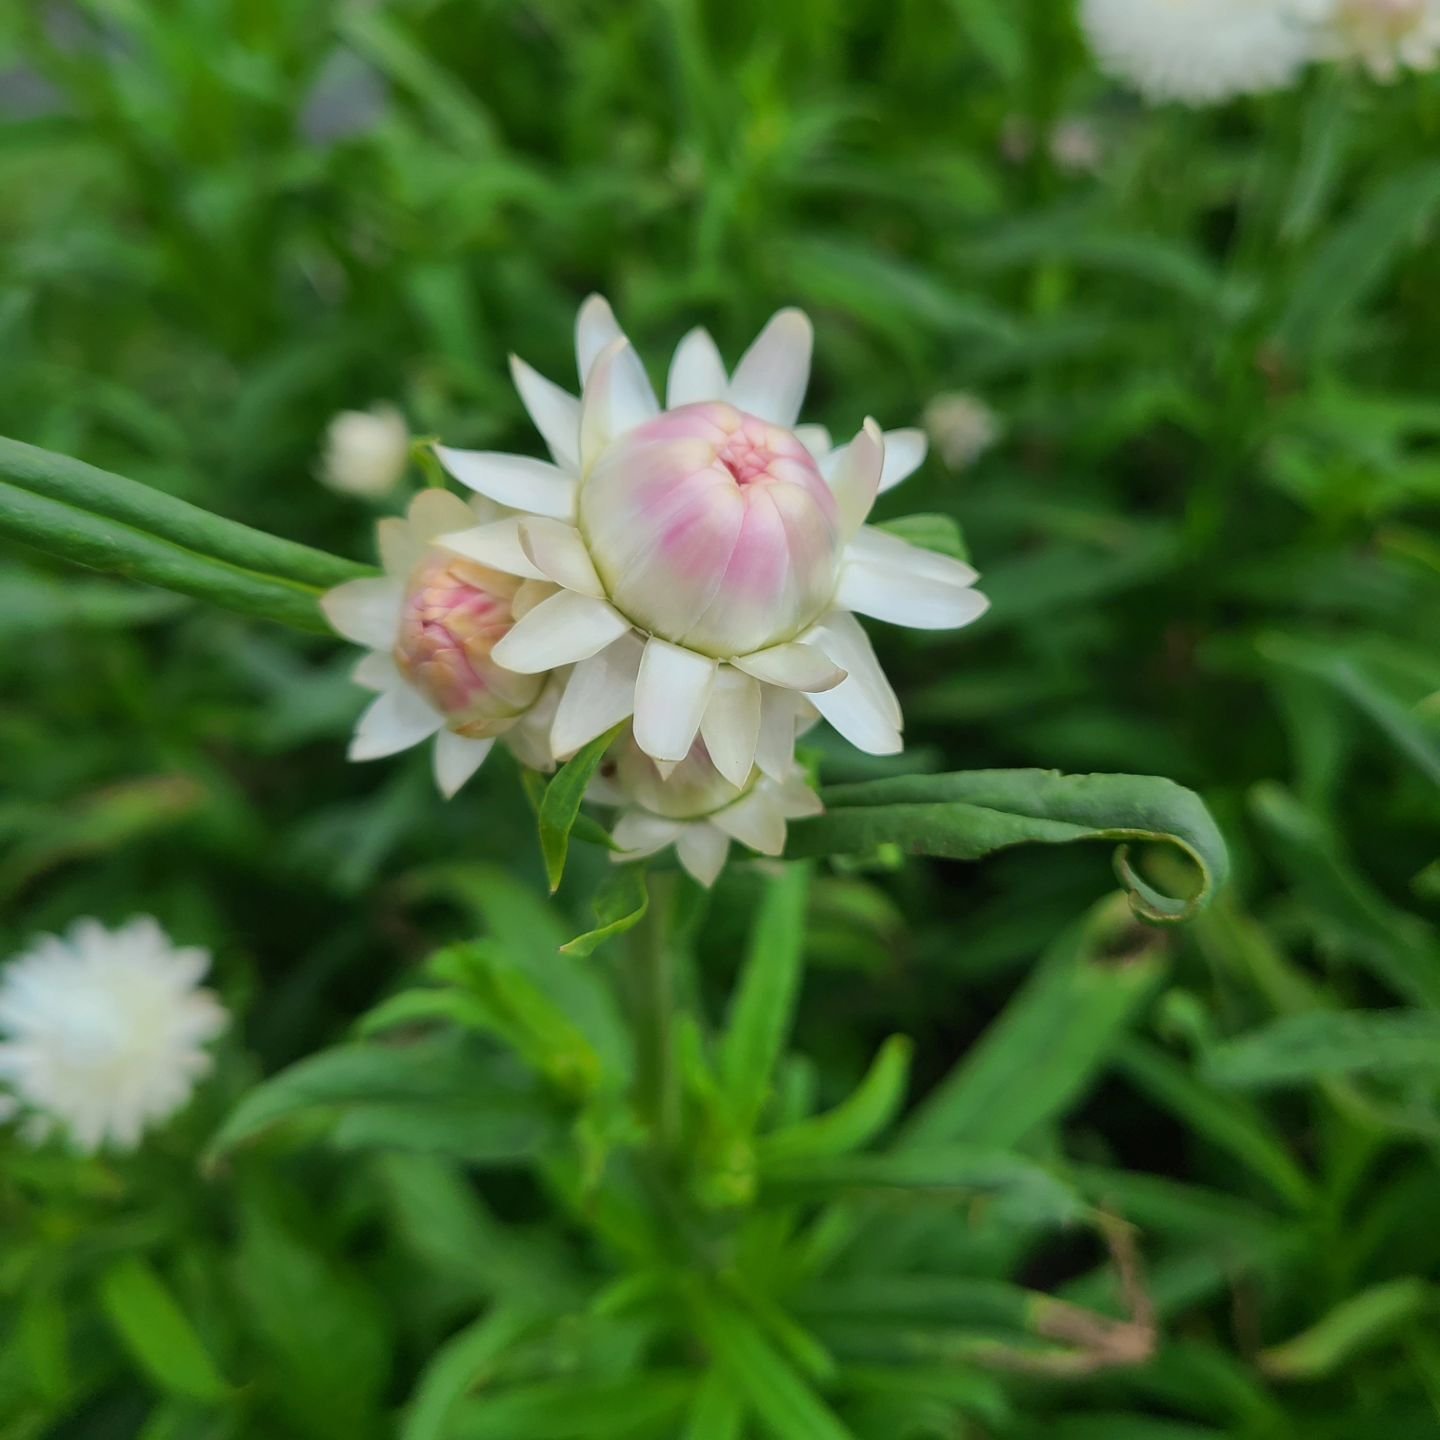 Strawflowers have always been a favorite.  They are beautiful fresh, last forever dried, and are amazing for corsage and boutonniere work. They also bring a shiney luster to bouquets. This year, I planted up more than ever before, in more colors. I'm